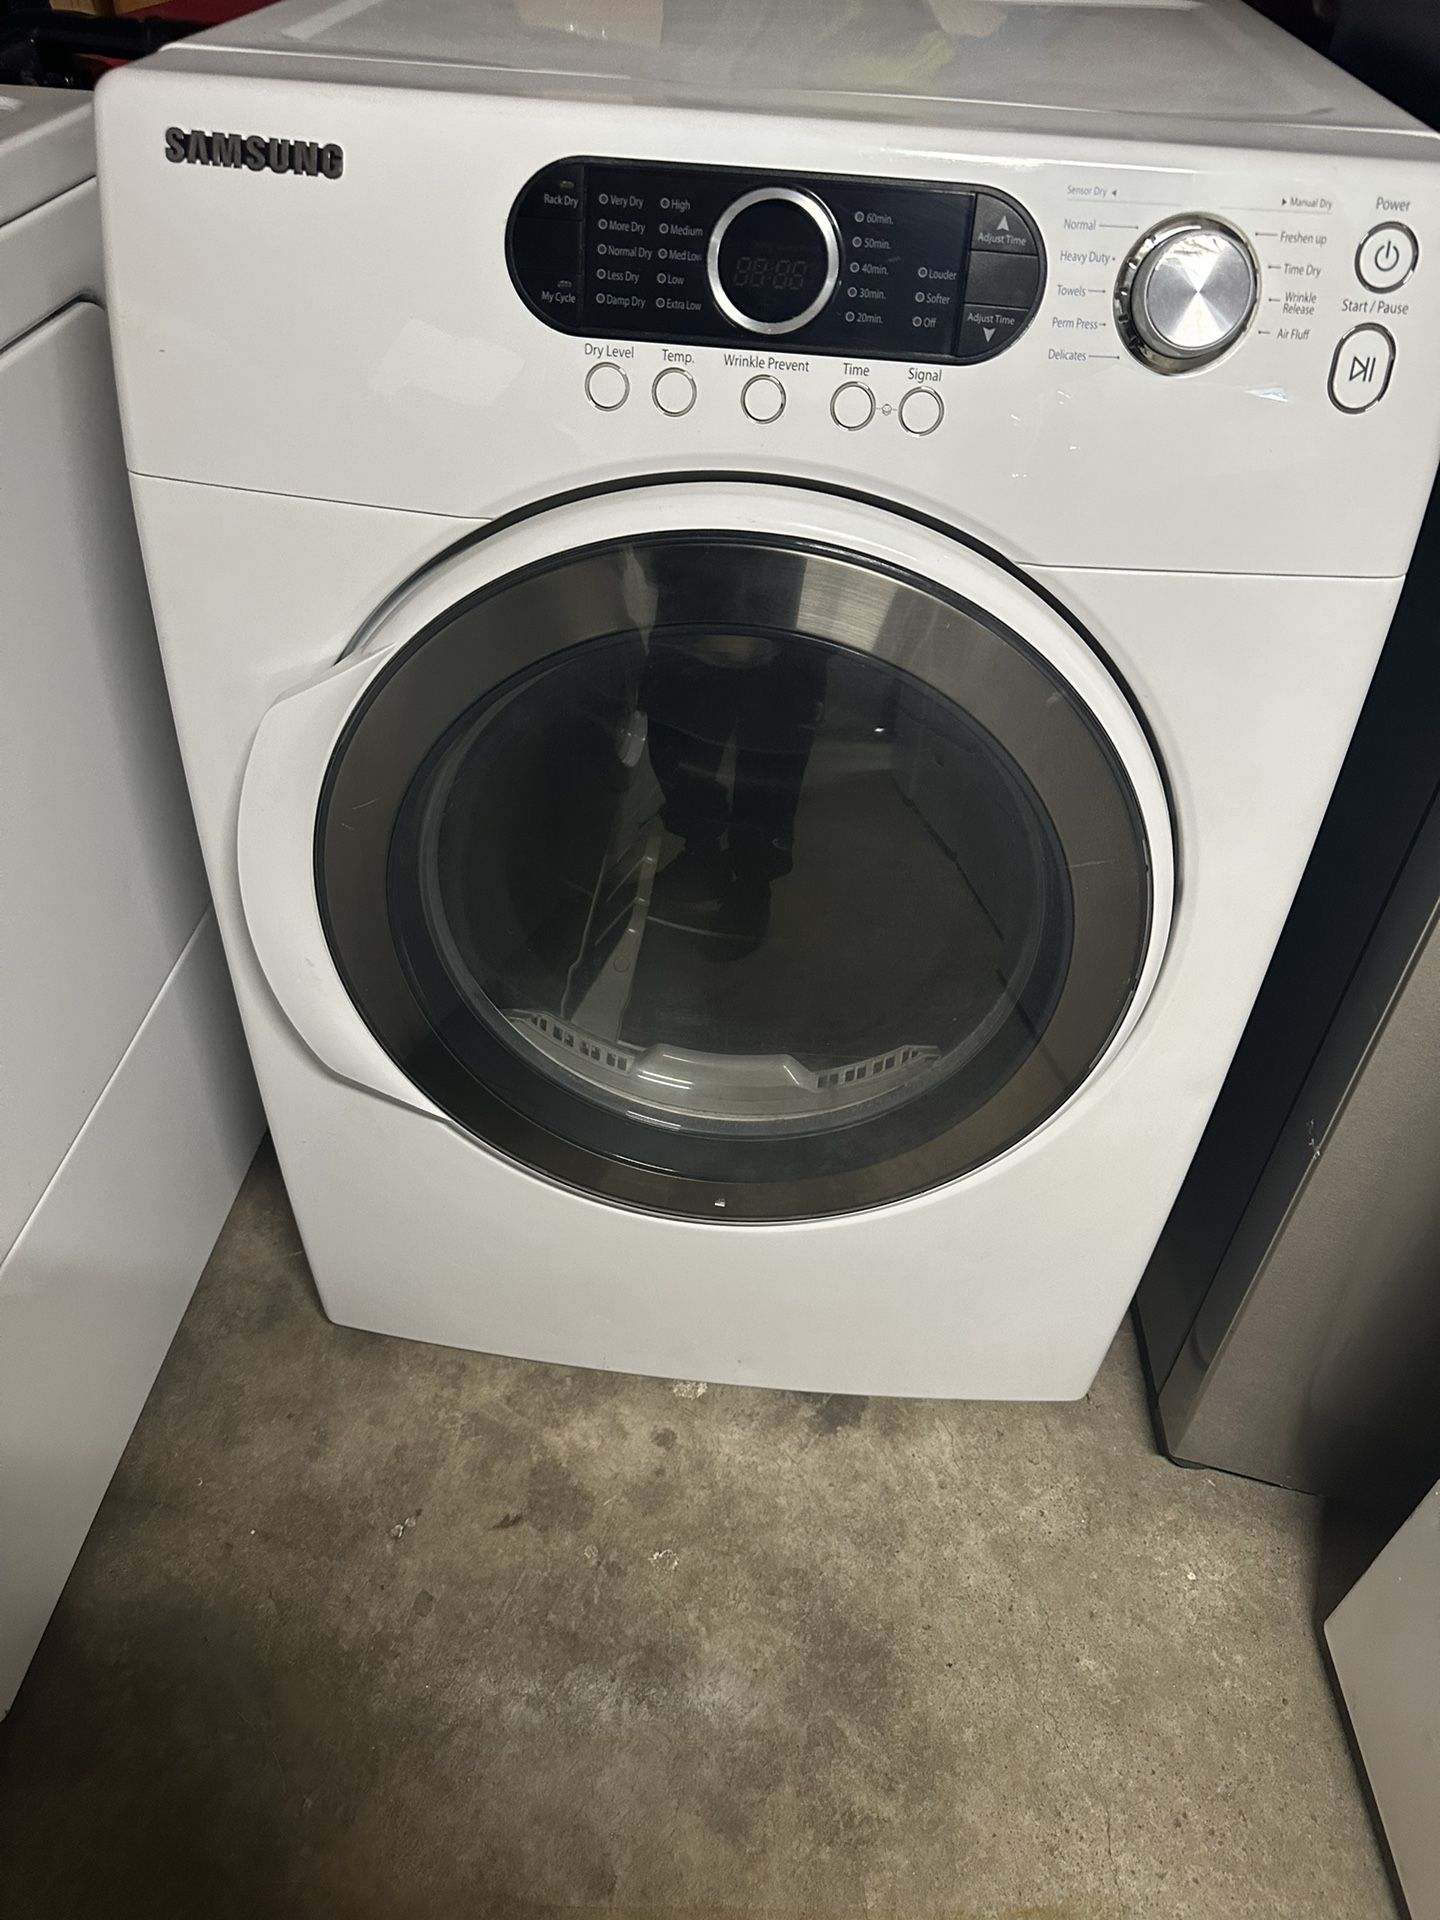 Samsung electric front load dryer